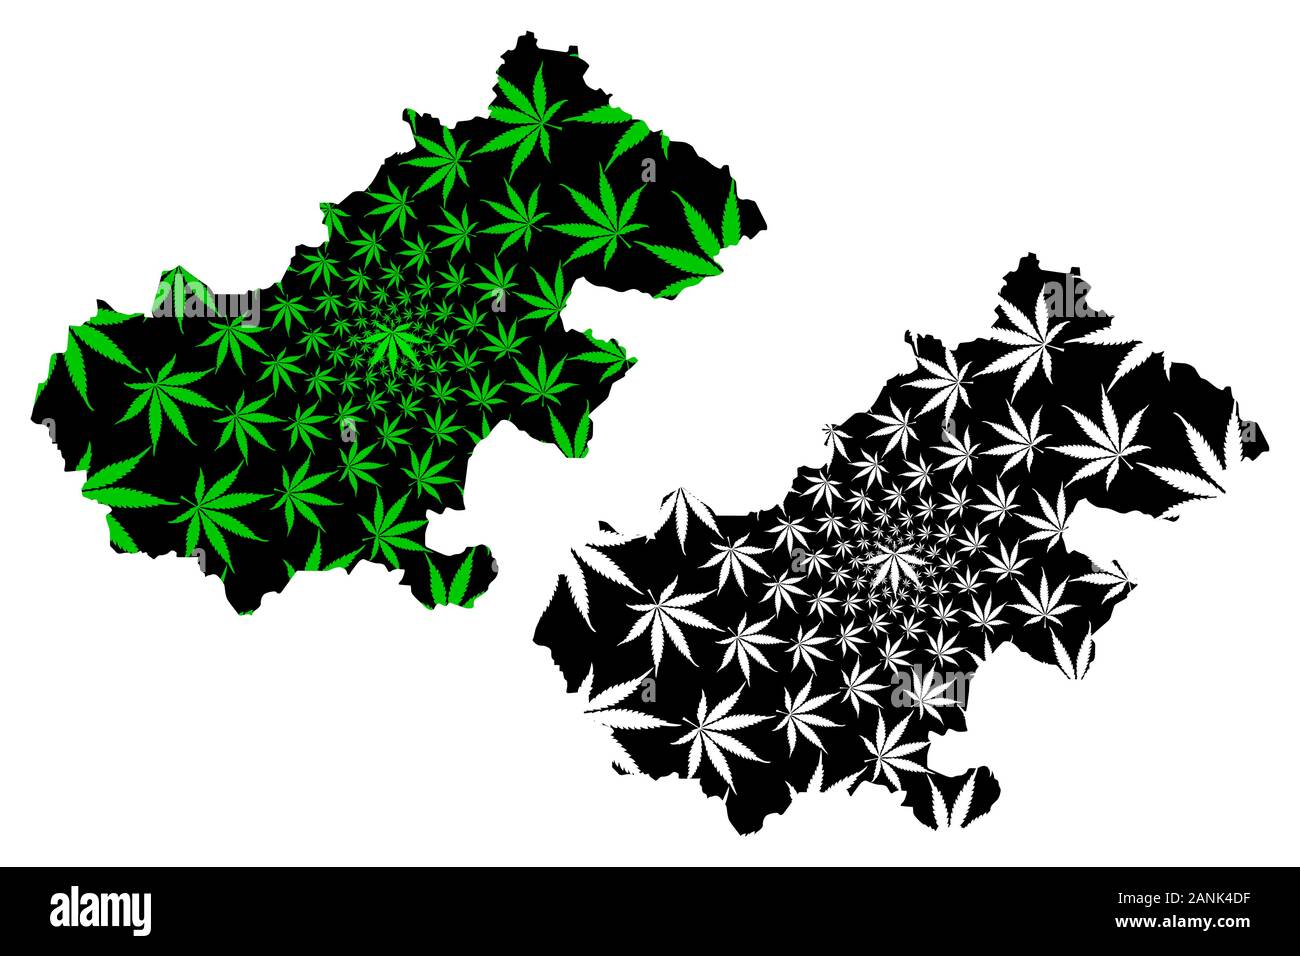 Satu Mare County (Administrative divisions of Romania, Nord-Vest development region) map is designed cannabis leaf green and black, Satu Mare map made Stock Vector